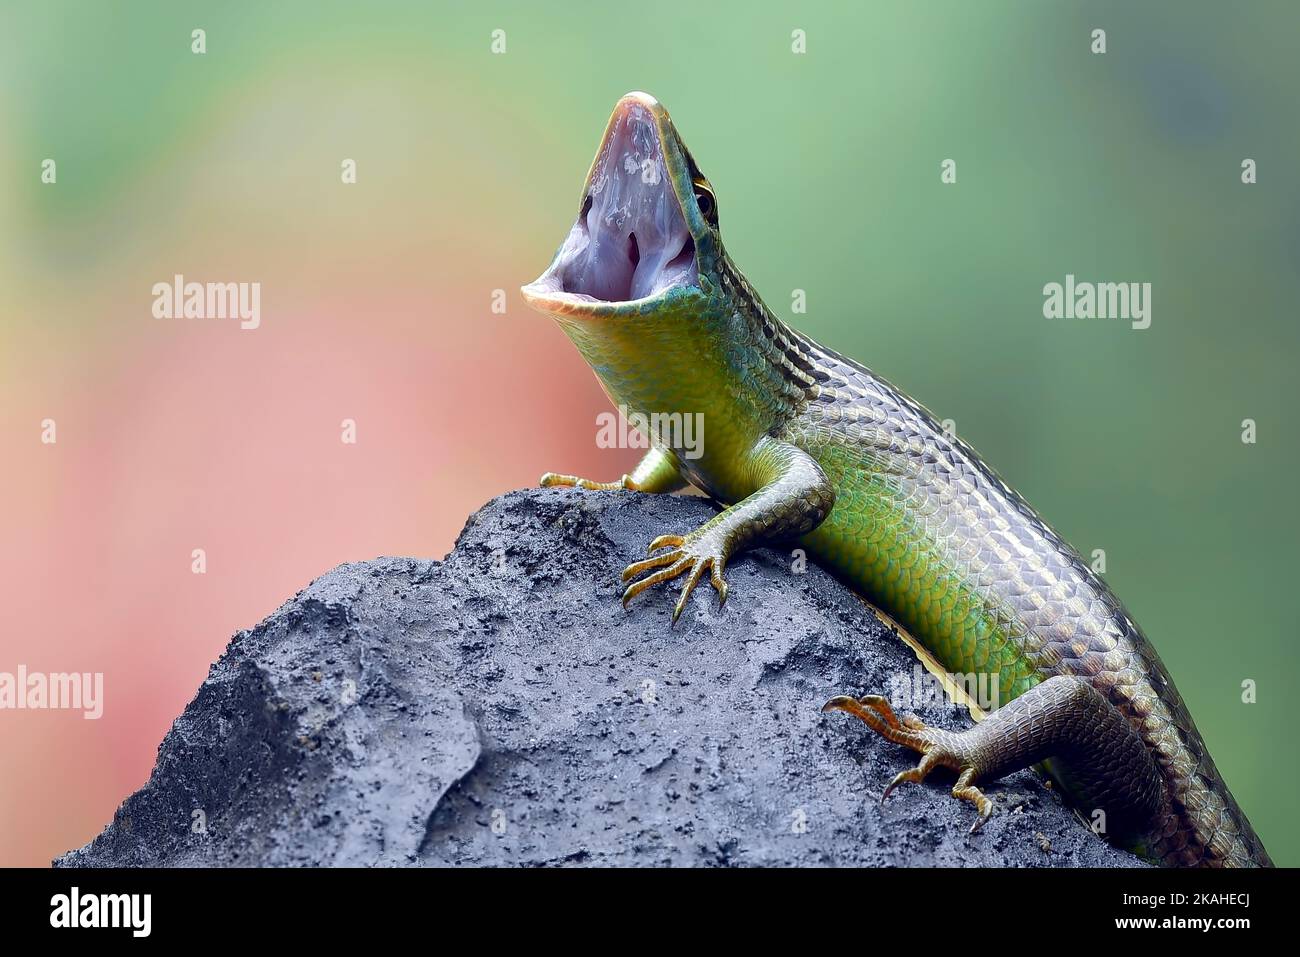 Close-up of an Olive tree skink on a rock, Indonesia Stock Photo